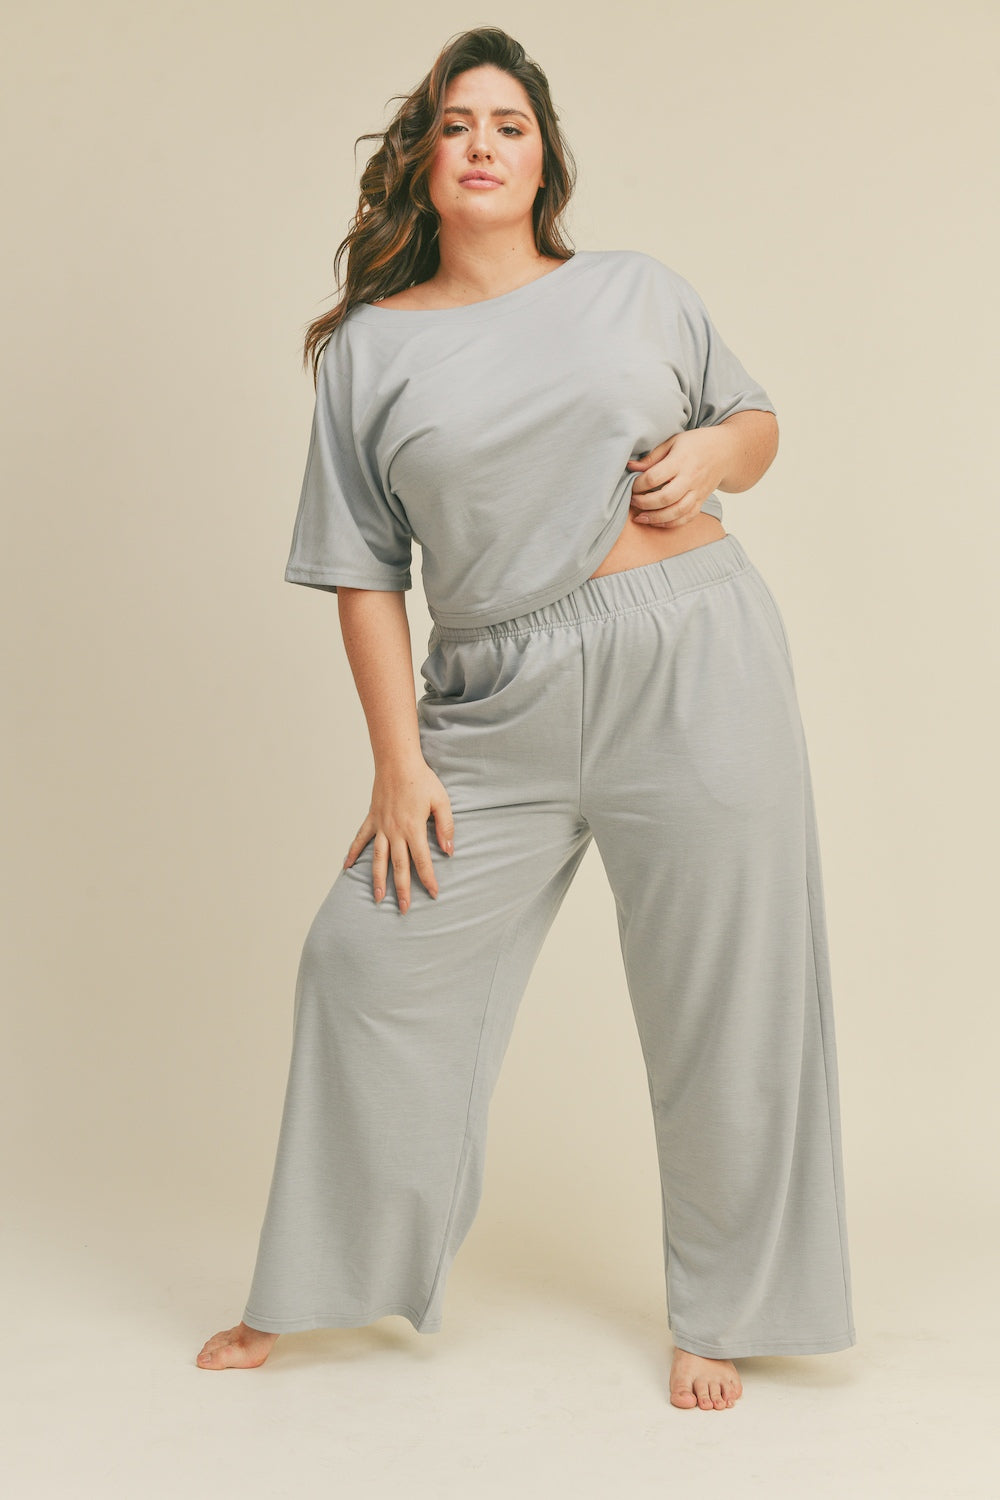 Stylish Grey Color Short Sleeve Cropped Top and Wide Leg Pants Set